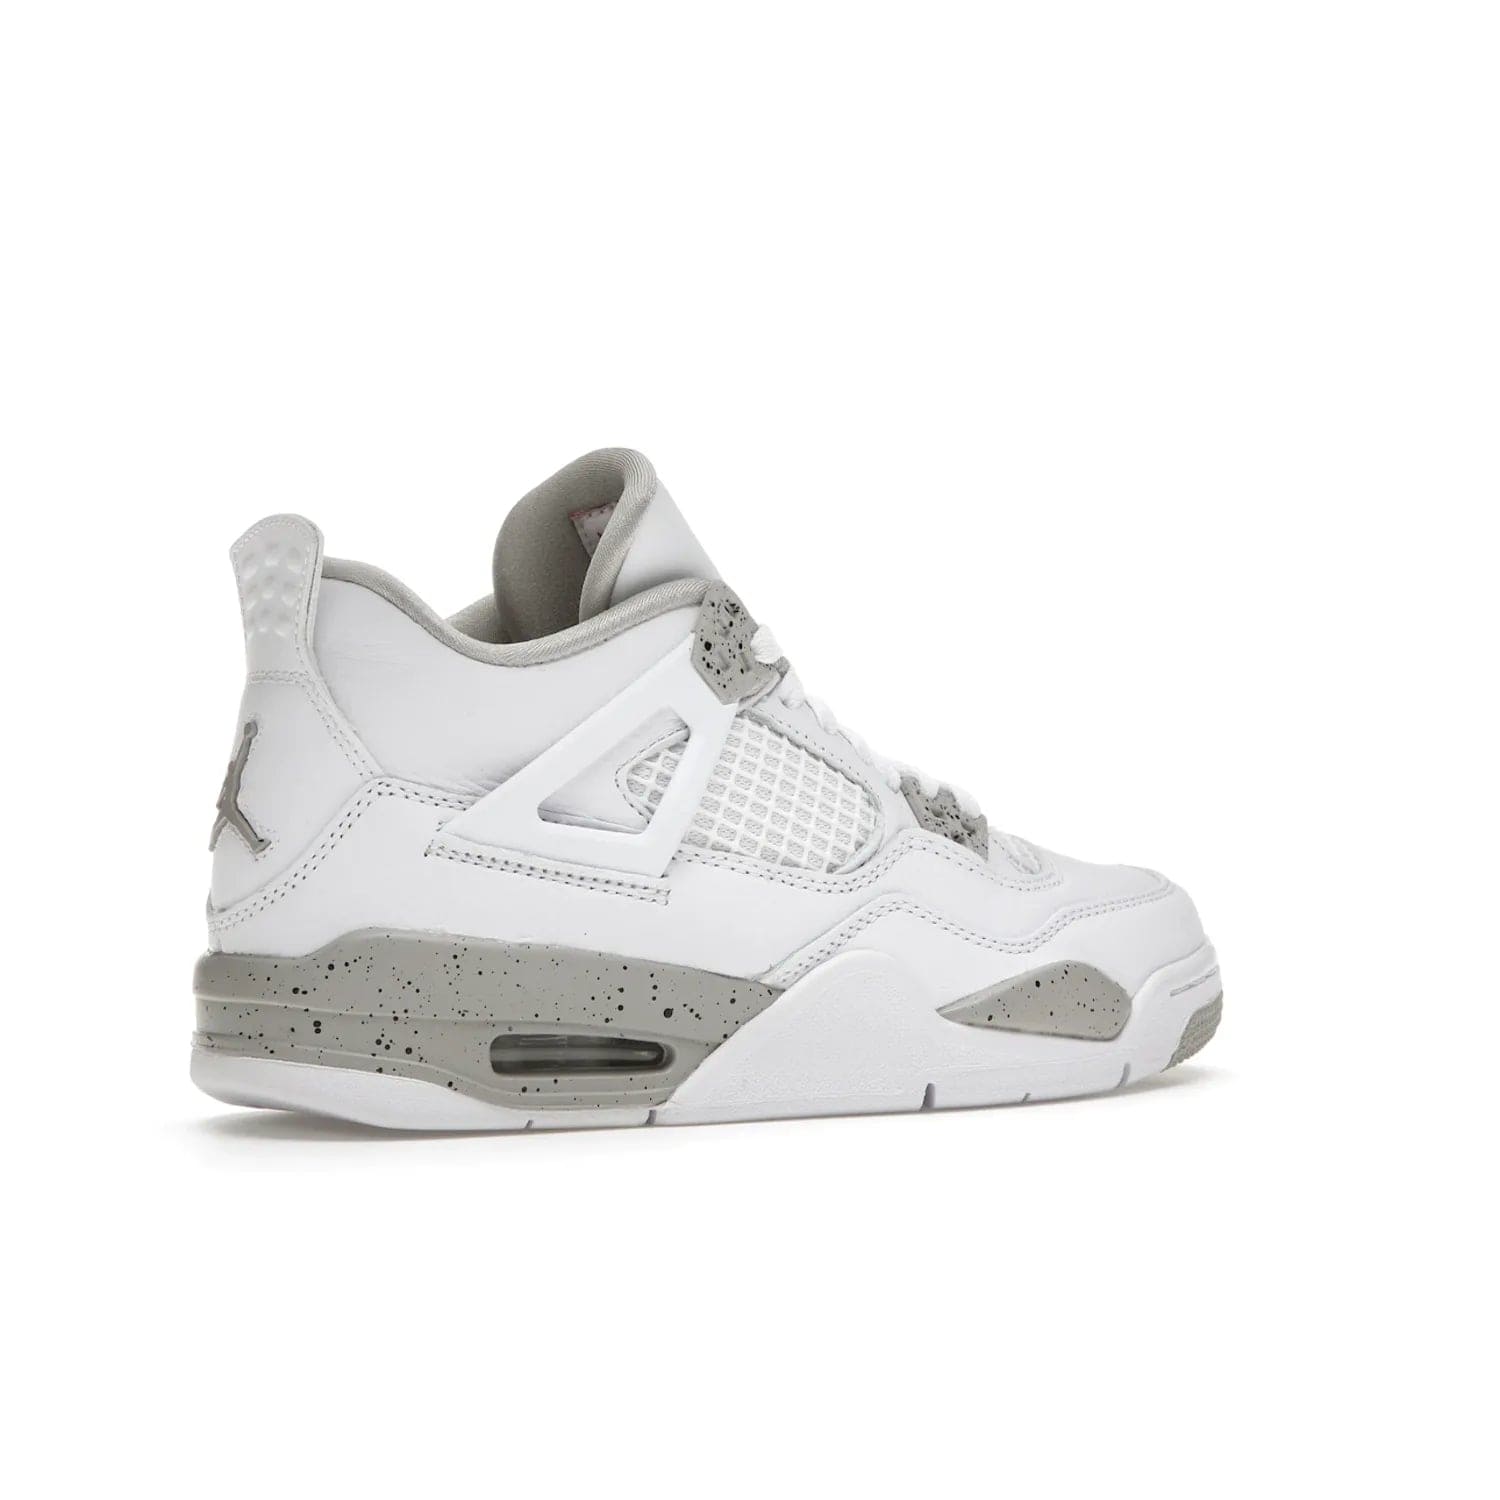 Jordan 4 Retro White Oreo (2021) (GS) - Image 34 - Only at www.BallersClubKickz.com - White Oreo Air Jordan 4 Retro 2021 GS - Iconic sneaker silhouette with white canvas upper, Tech Grey detailing, and Fire Red accents. Available July 2021.